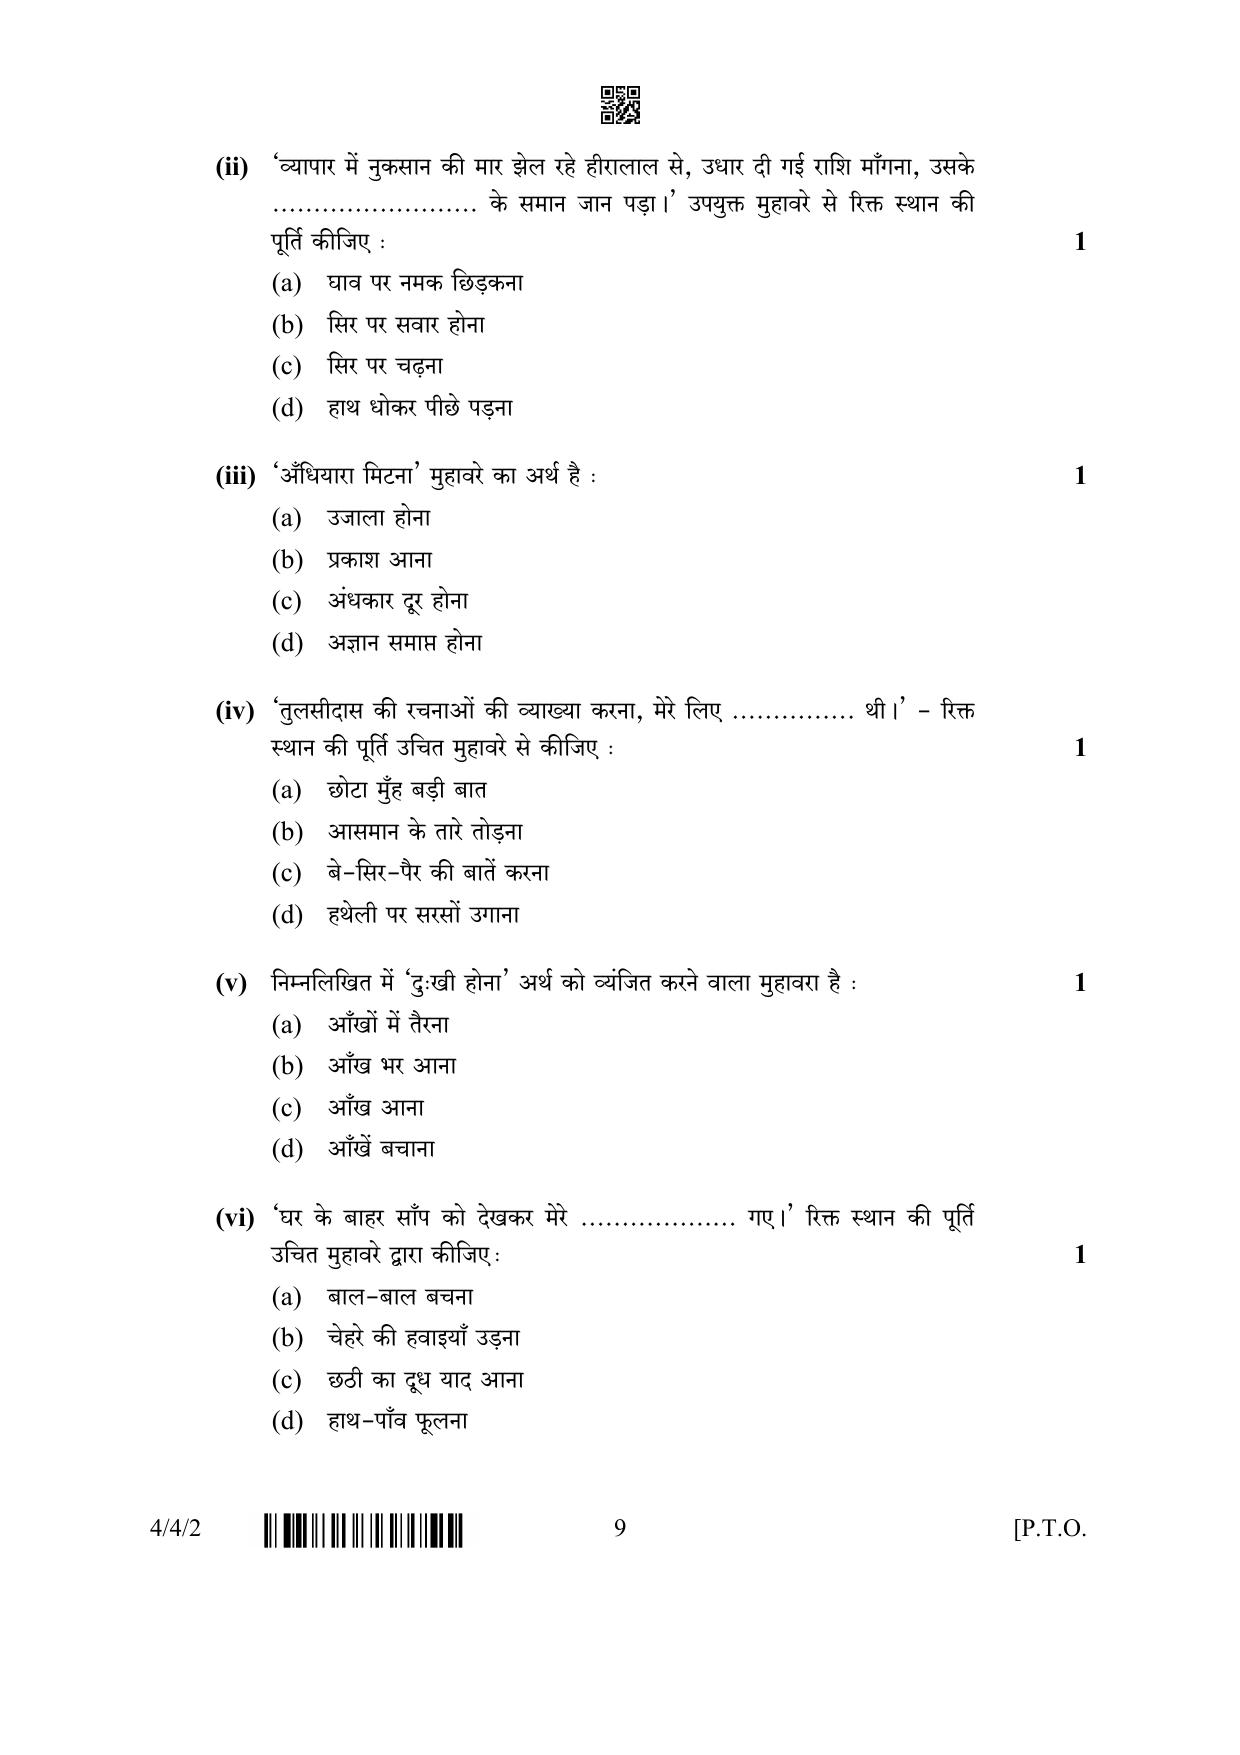 CBSE Class 10 4-4-2 Hindi B 2023 Question Paper - Page 9